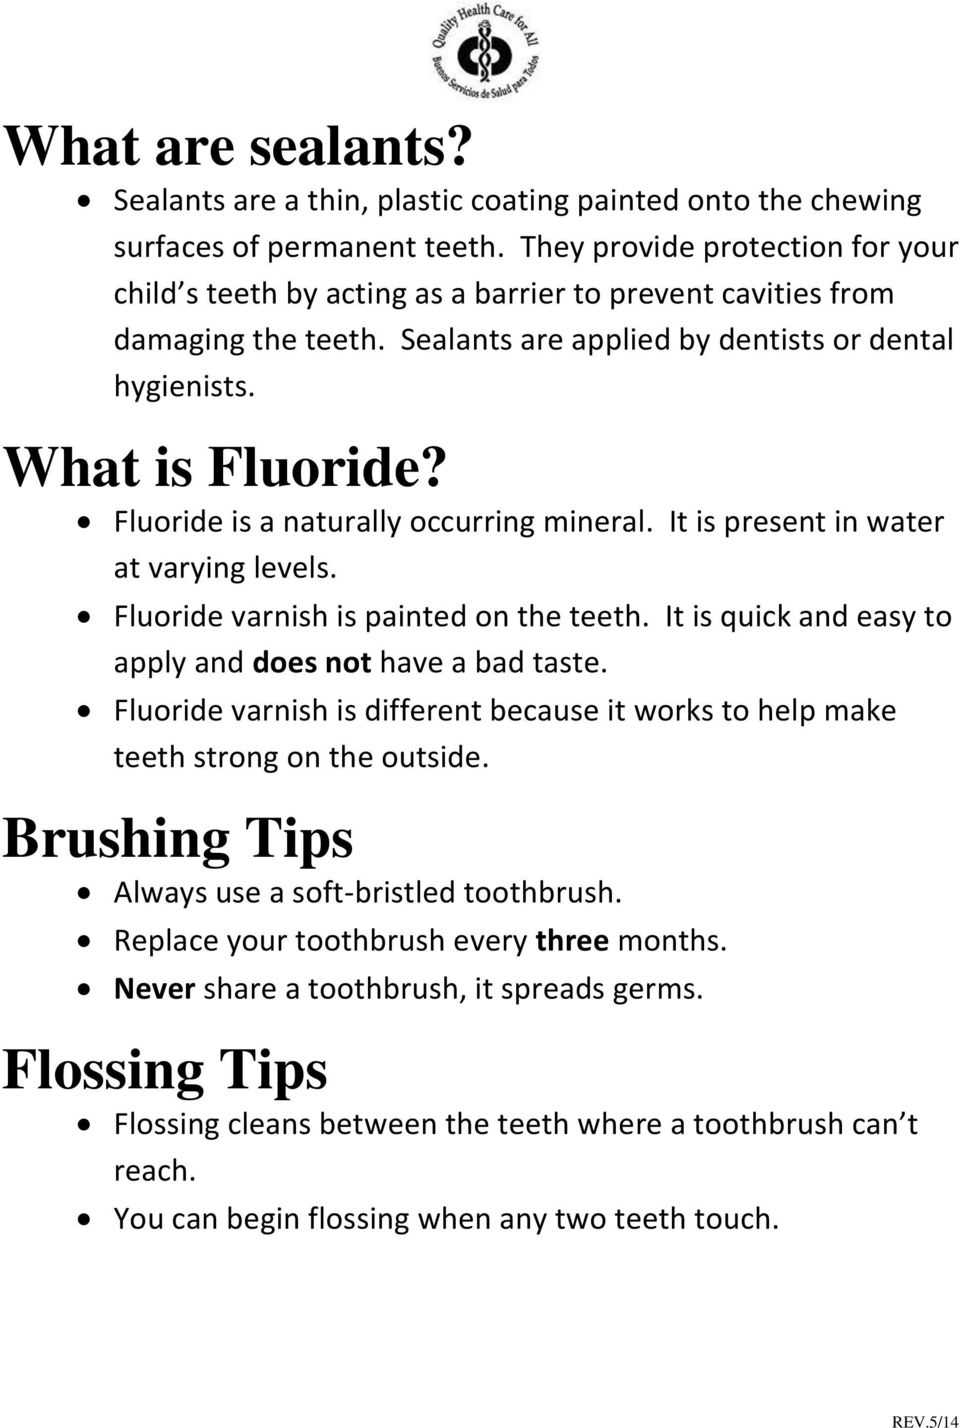 Fluoride is a naturally occurring mineral. It is present in water at varying levels. Fluoride varnish is painted on the teeth. It is quick and easy to apply and does not have a bad taste.